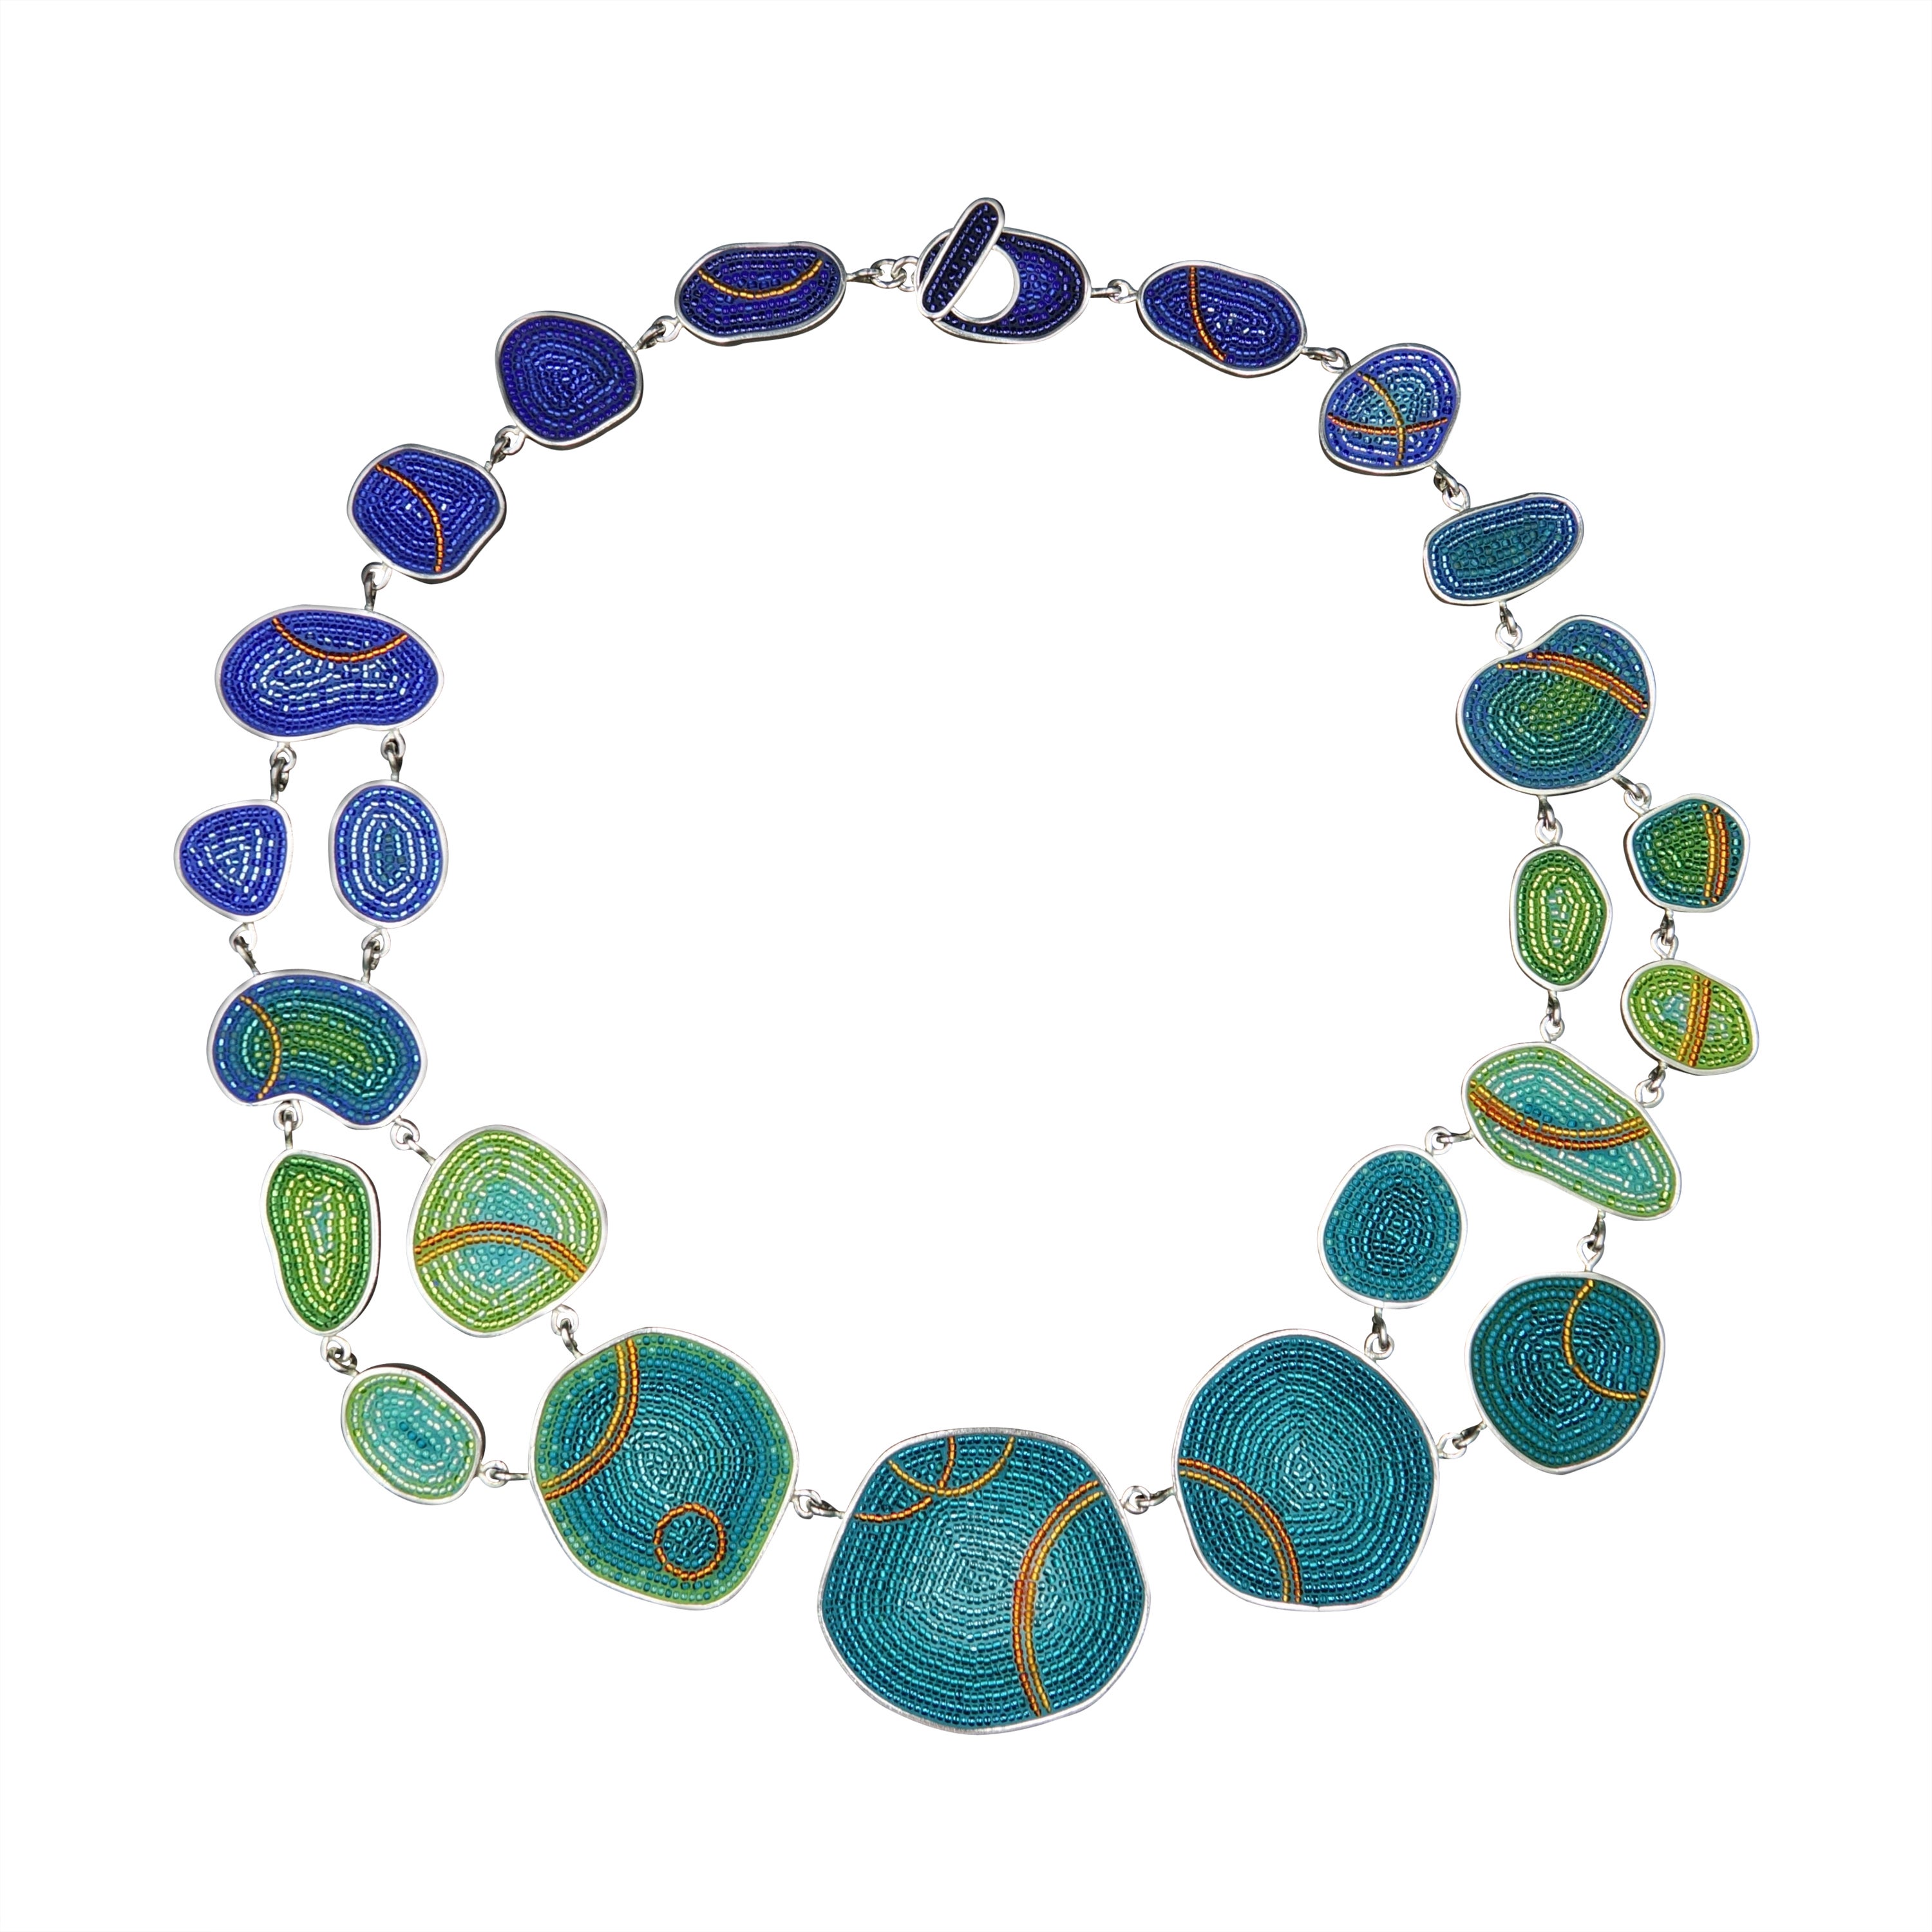 Micro-Mosaic Interconnected Pebbles Necklace by Courtney Denise Lipson